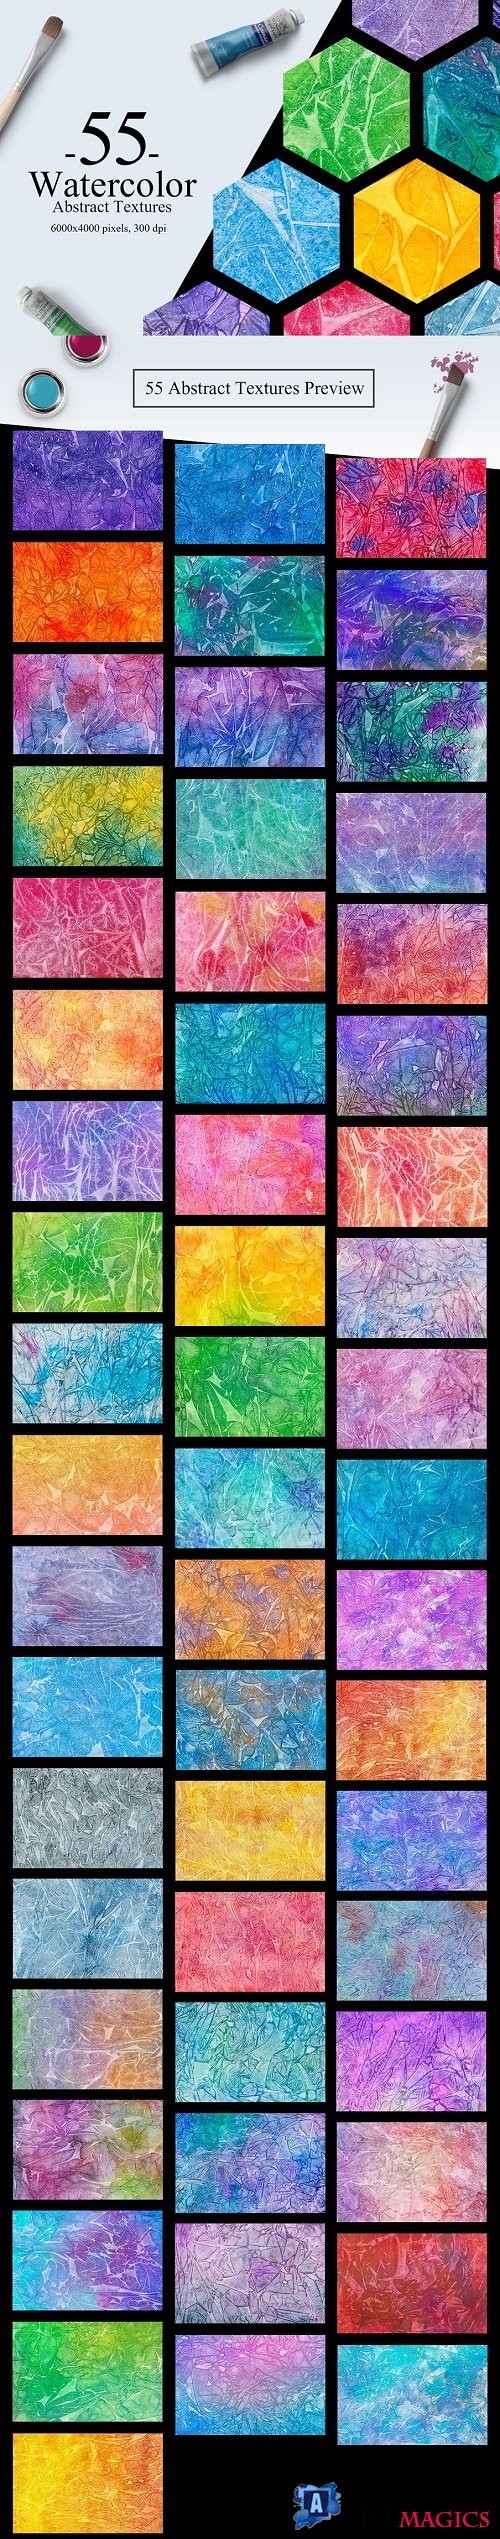 55 Watercolor Abstract Textures - 2199797